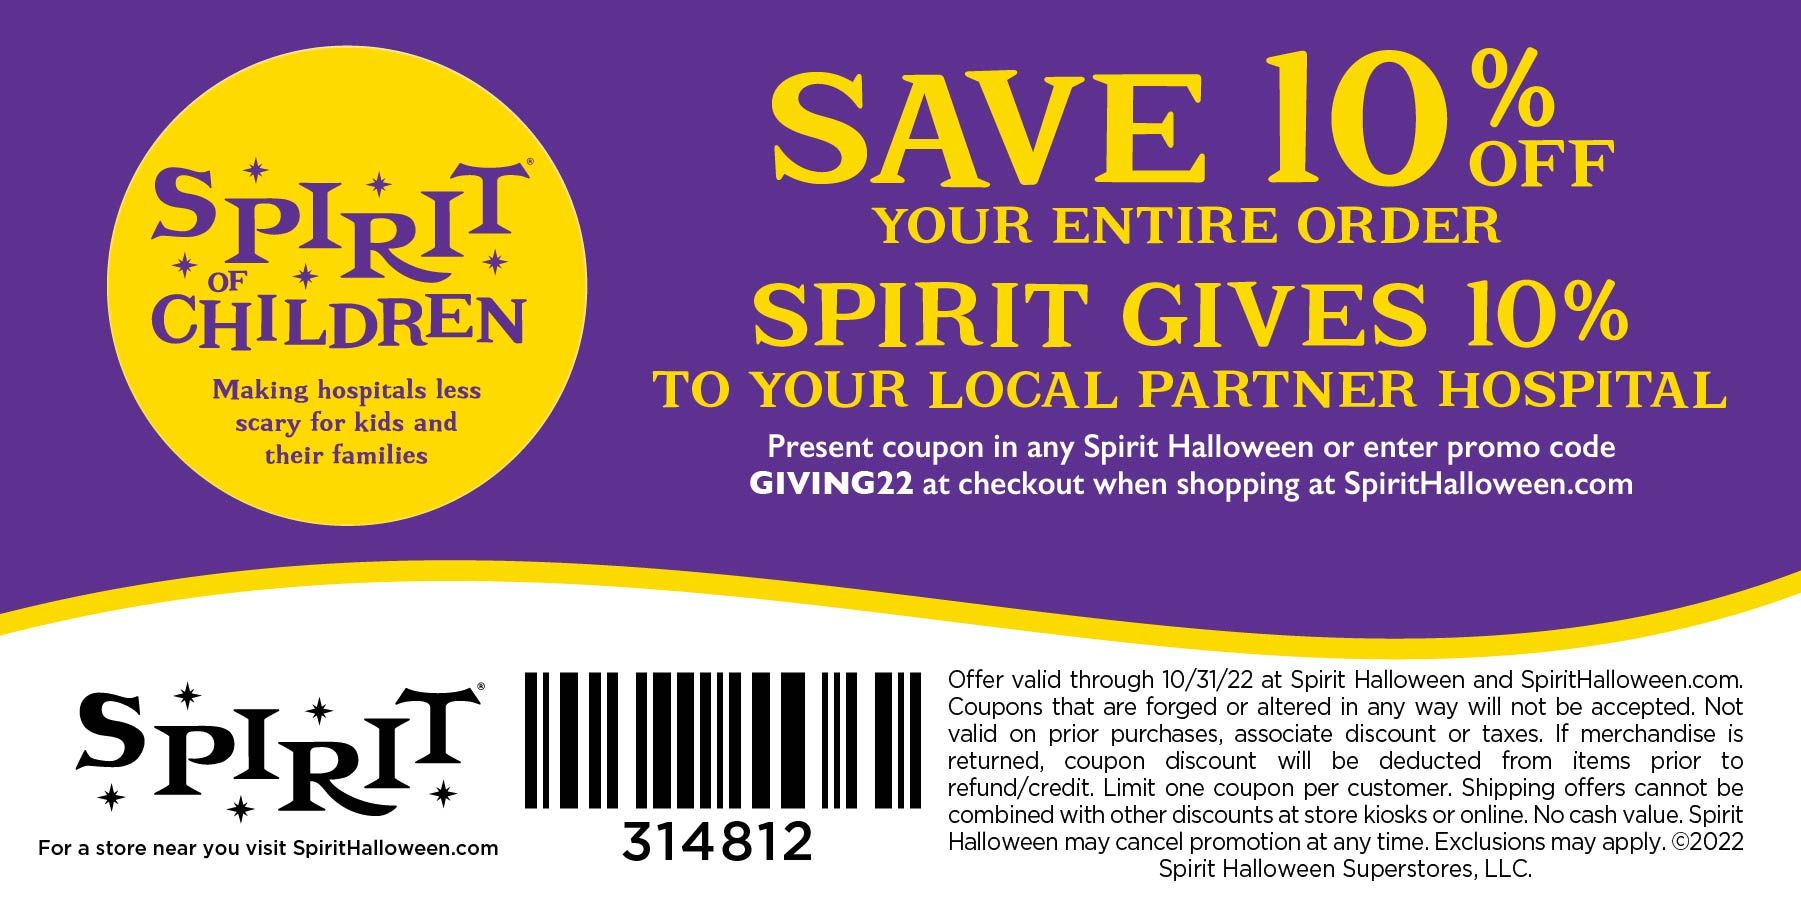 Spirit Halloween 10 for 10 Campaign